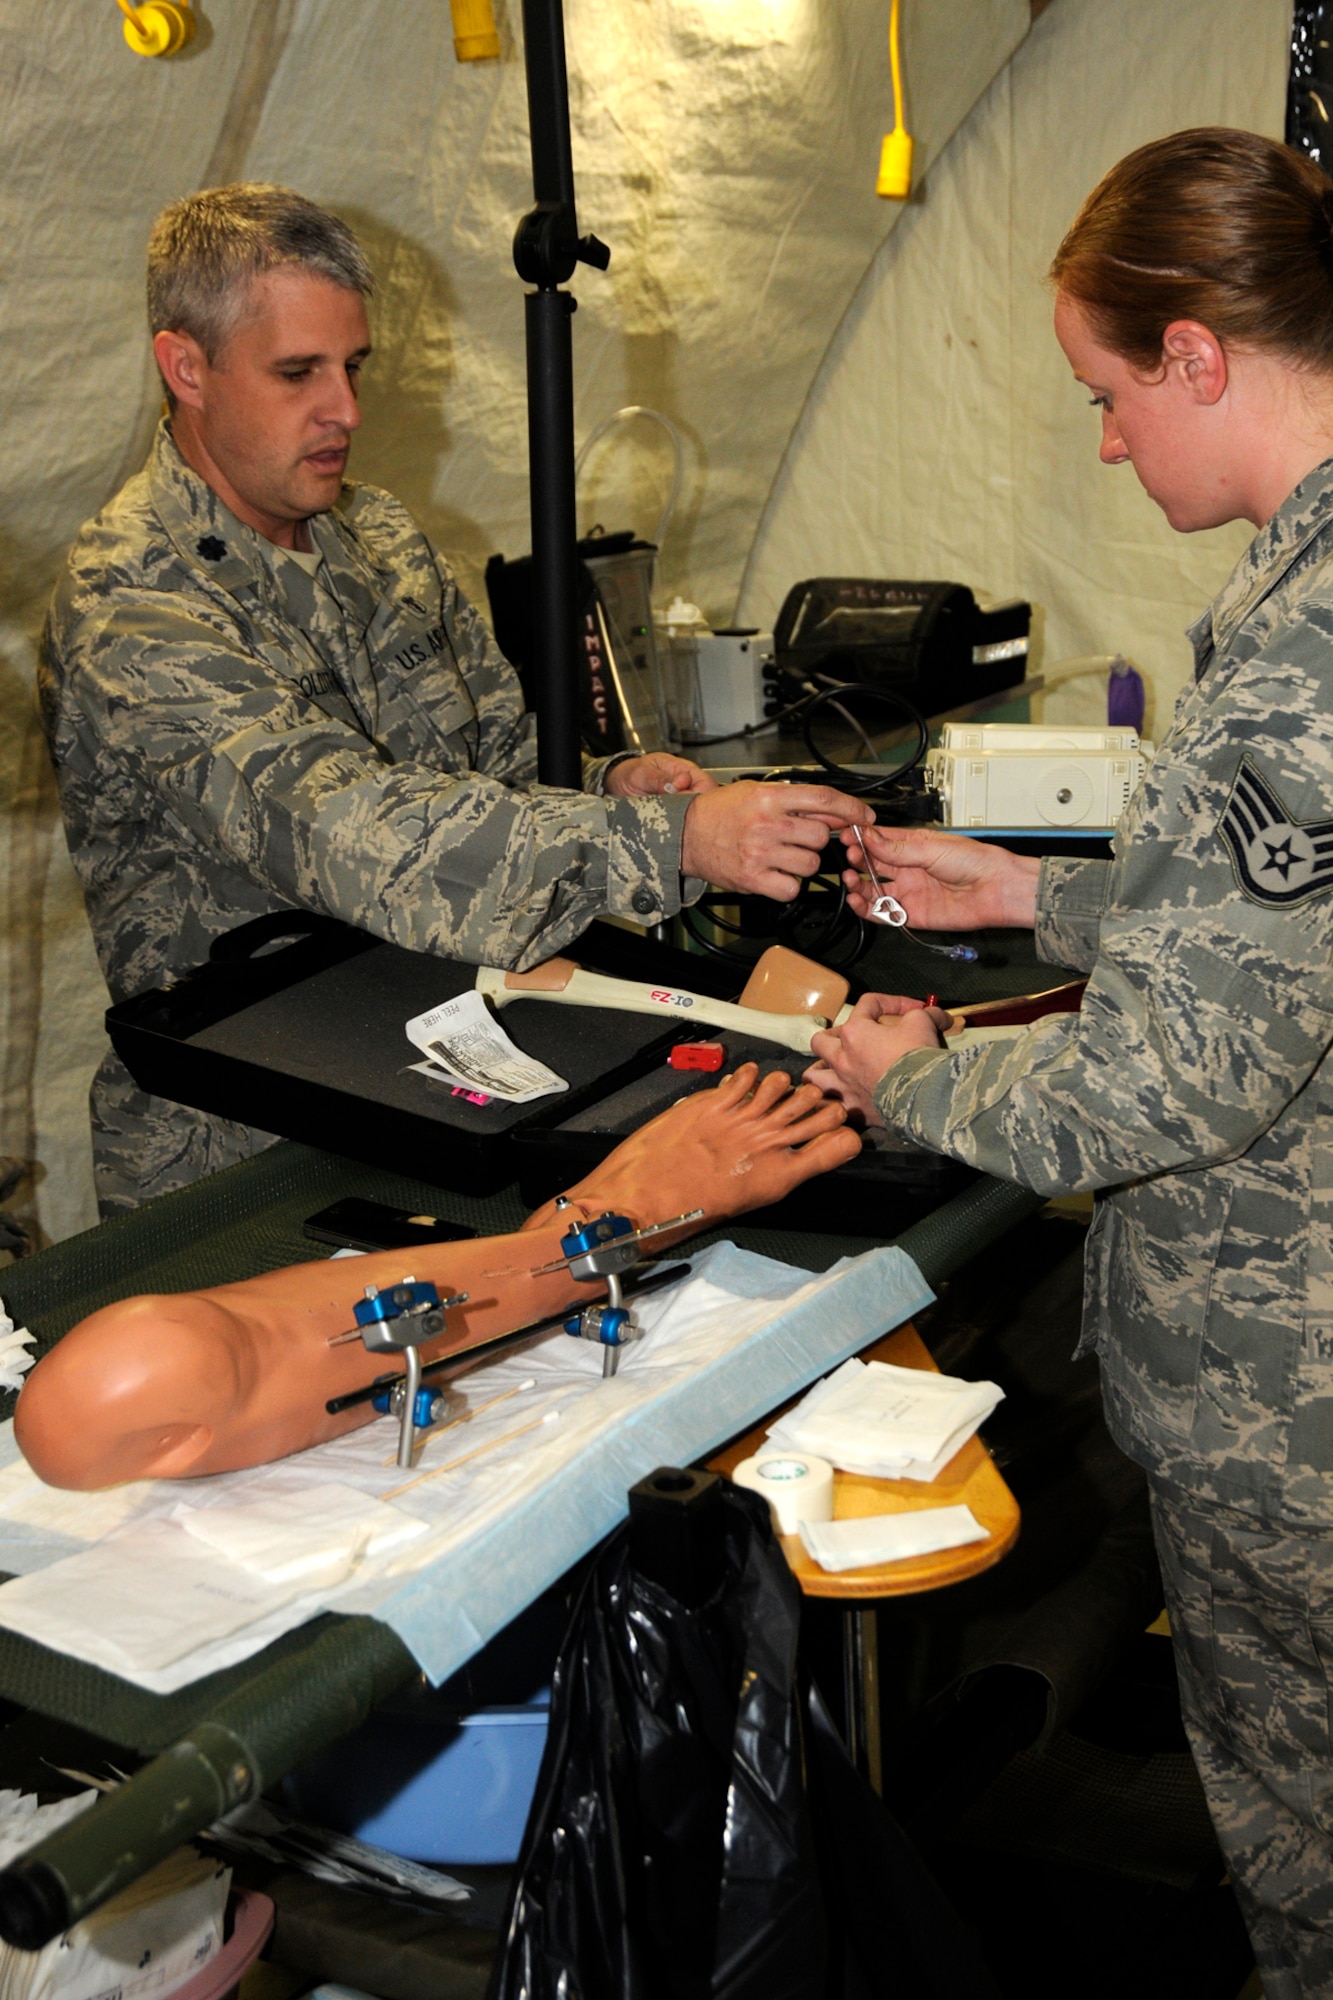 Lt. Col. Dr. Robert Goldtrap, 188th Medical Group, Arkansas Air National Guard, demonstrates a procedure to Staff Sgt. Jamie McClelland, 127th Medical Group, Michigan Air National Guard, during a training exercise at the Alpena Combat Readiness Training Center, Mich., May 23, 2012. The exercise brought together Airmen from eight medical groups from seven states. (U.S. Air Force photo by TSgt. David Kujawa)